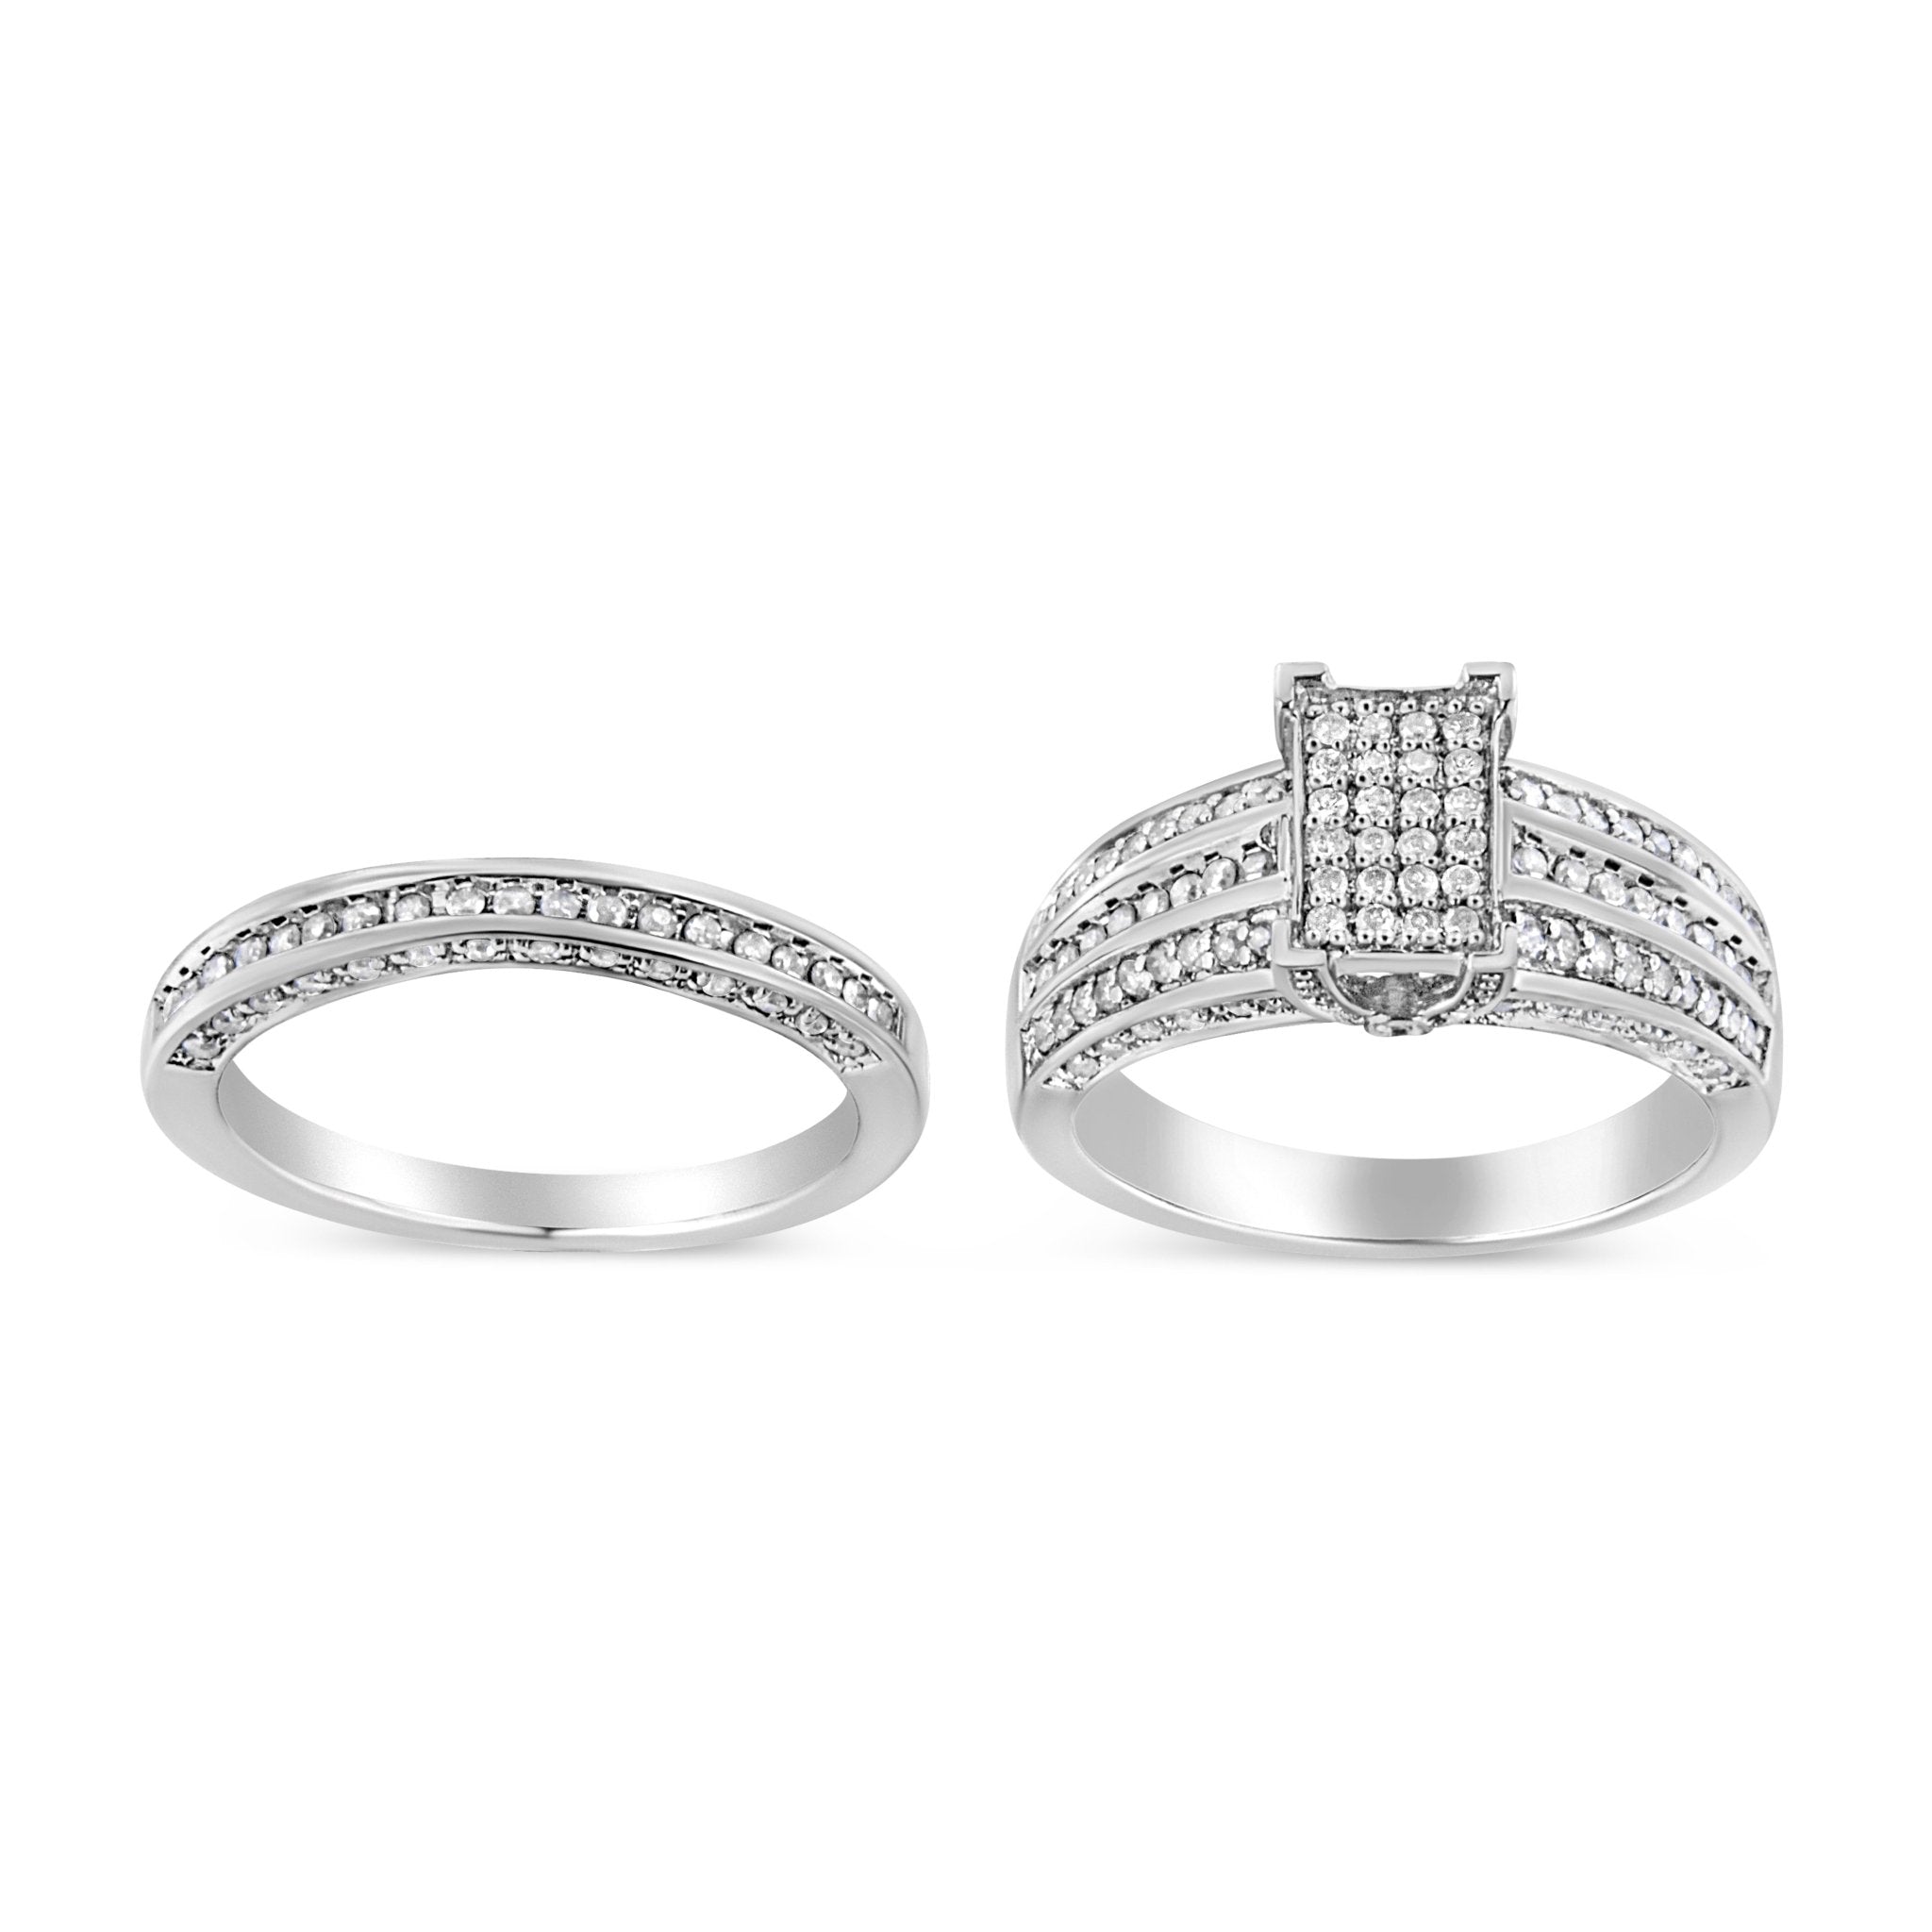 .925-Sterling-Silver-3/4-Cttw-Prong-Set-Round-Diamond-Composite-Engagement-Ring-And-Band-Set-(I-J-Color,-I3-Clarity)-Size-9-Rings